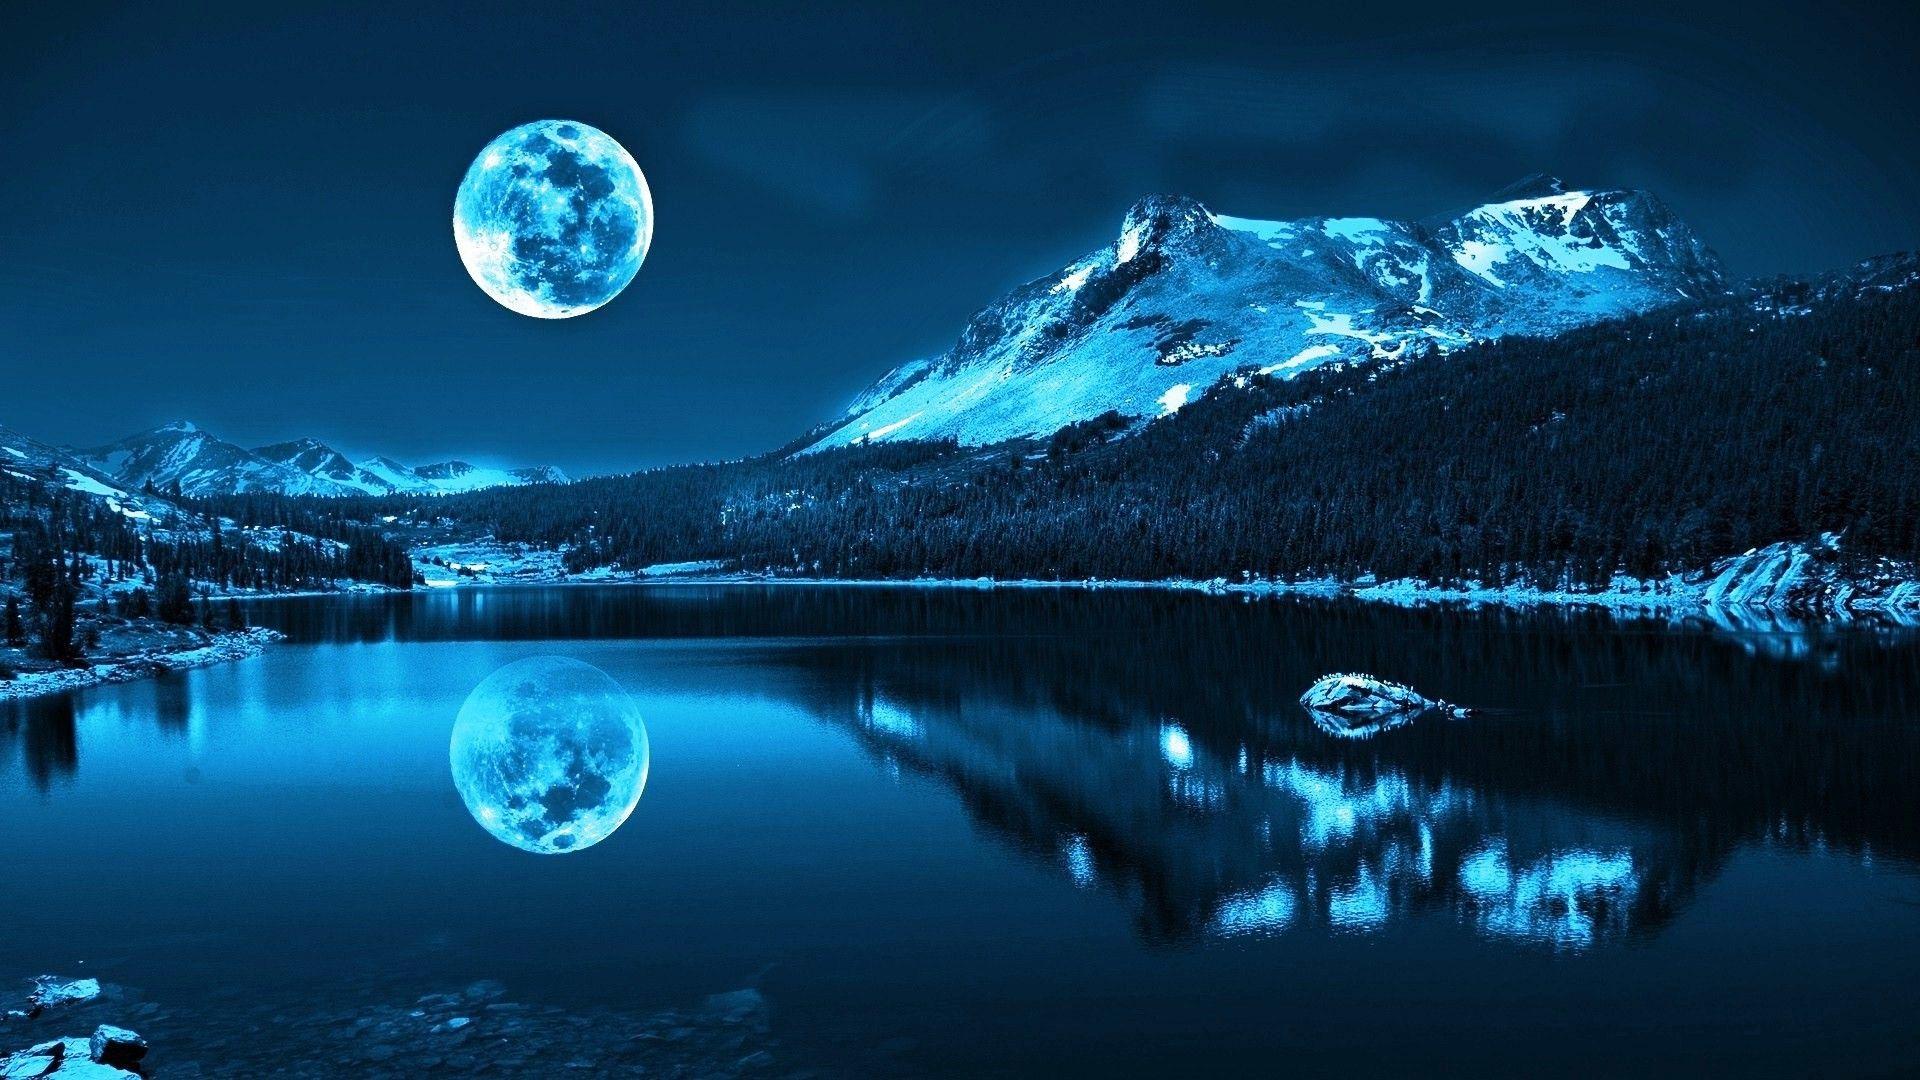 Image detail for -Lake at moonlight wallpaper. The Free